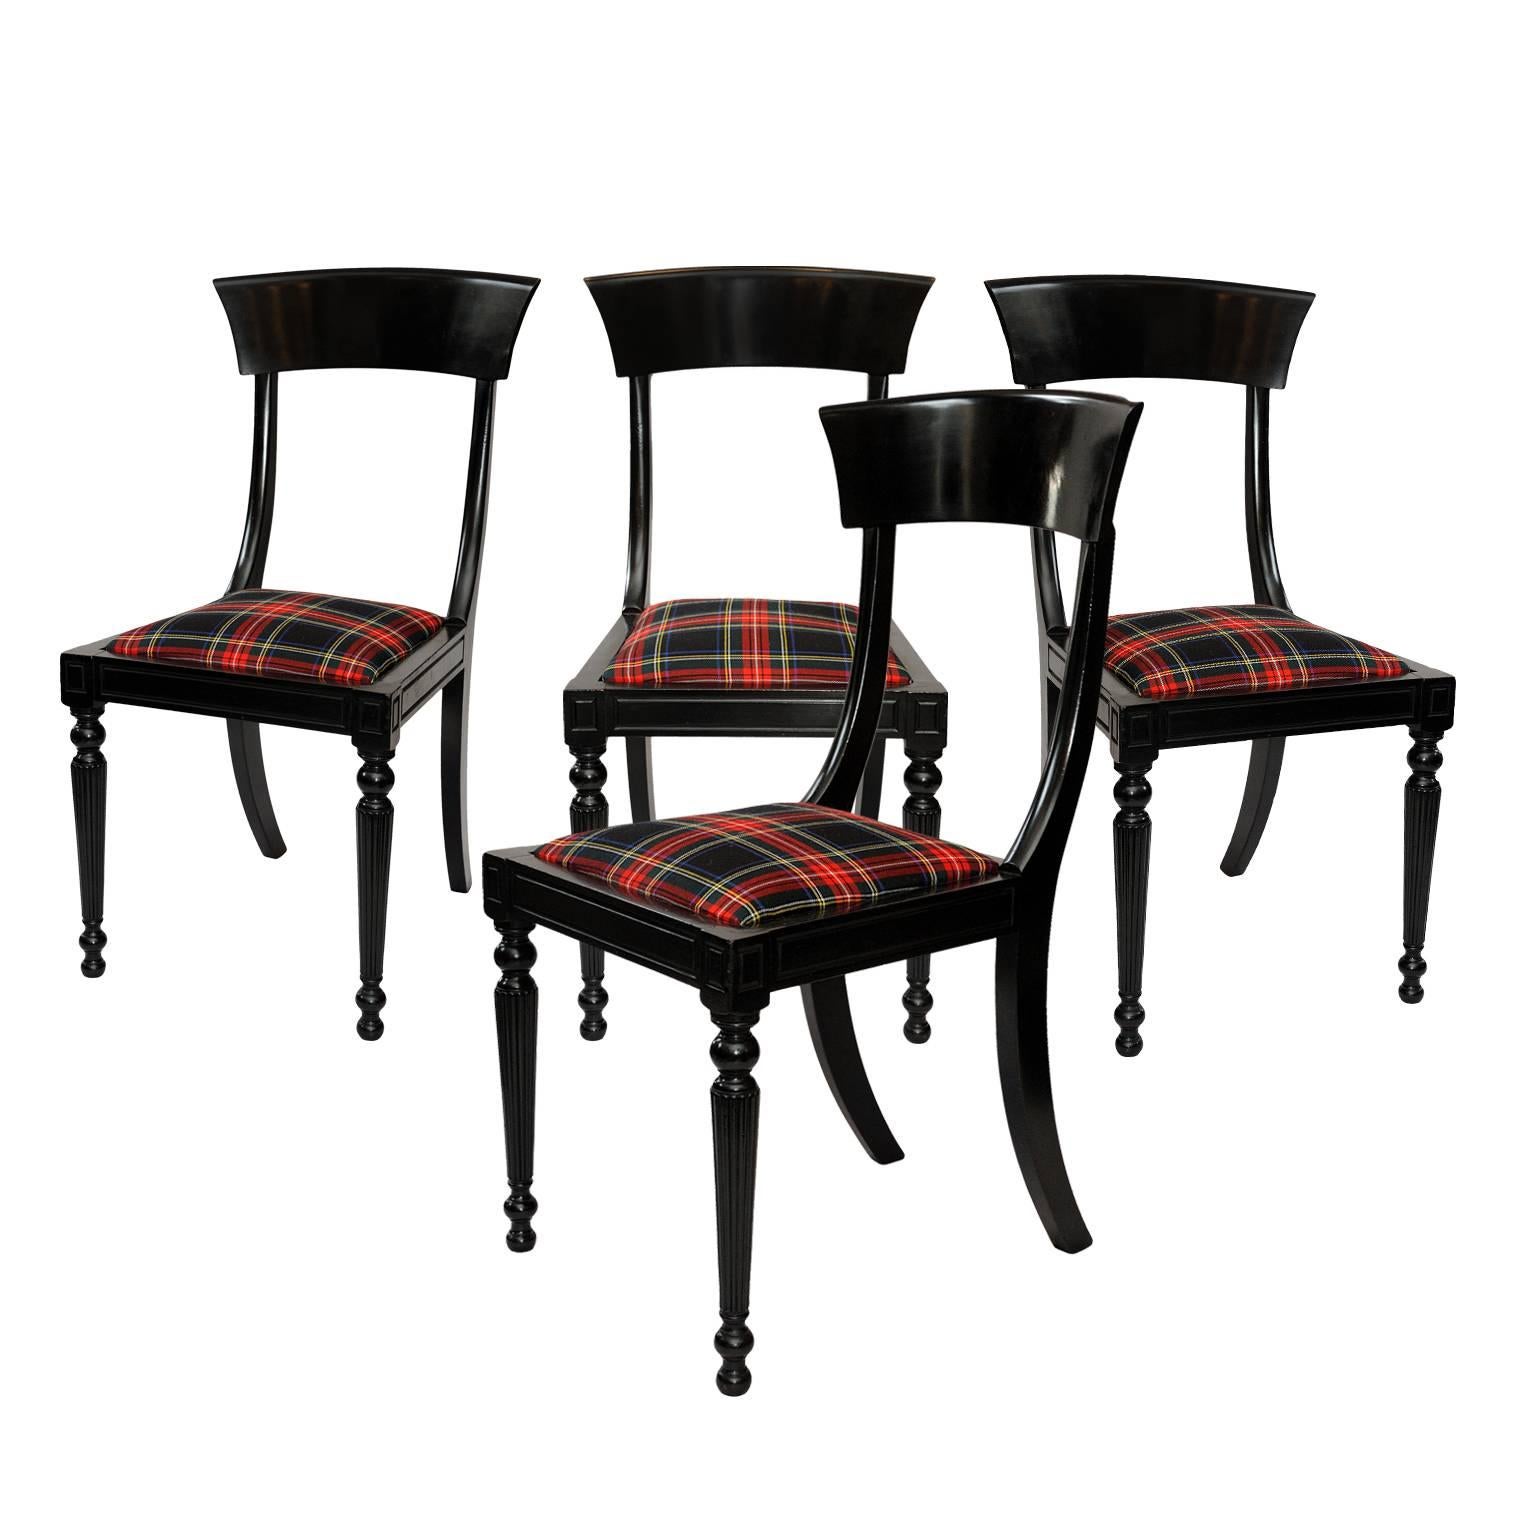 Set of Four Early 19th century Ebonized Side Chairs, circa 1830 For Sale